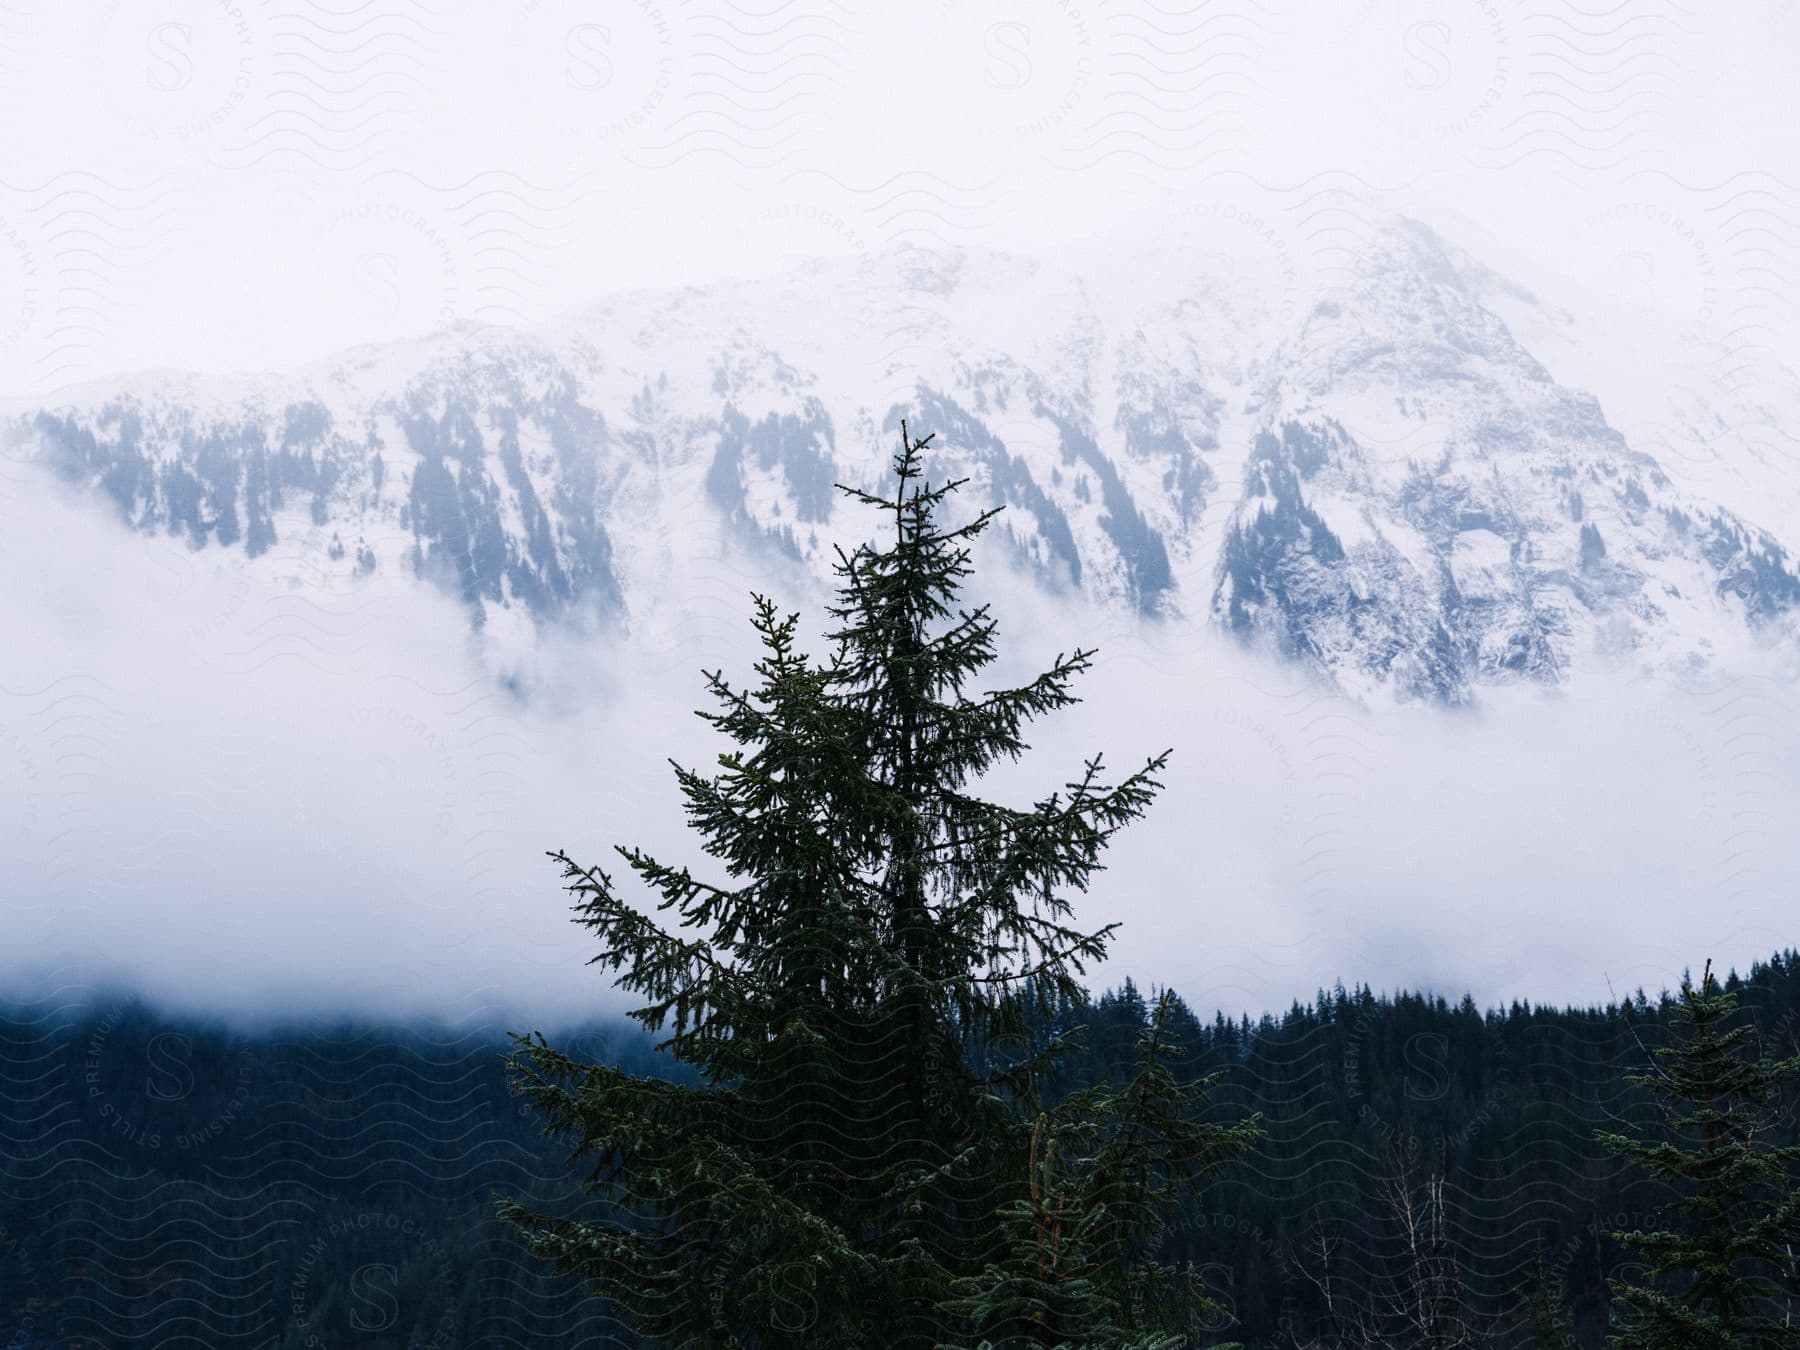 A single evergreen tree rises out of a forest at the foot of a vast snowy mountain.